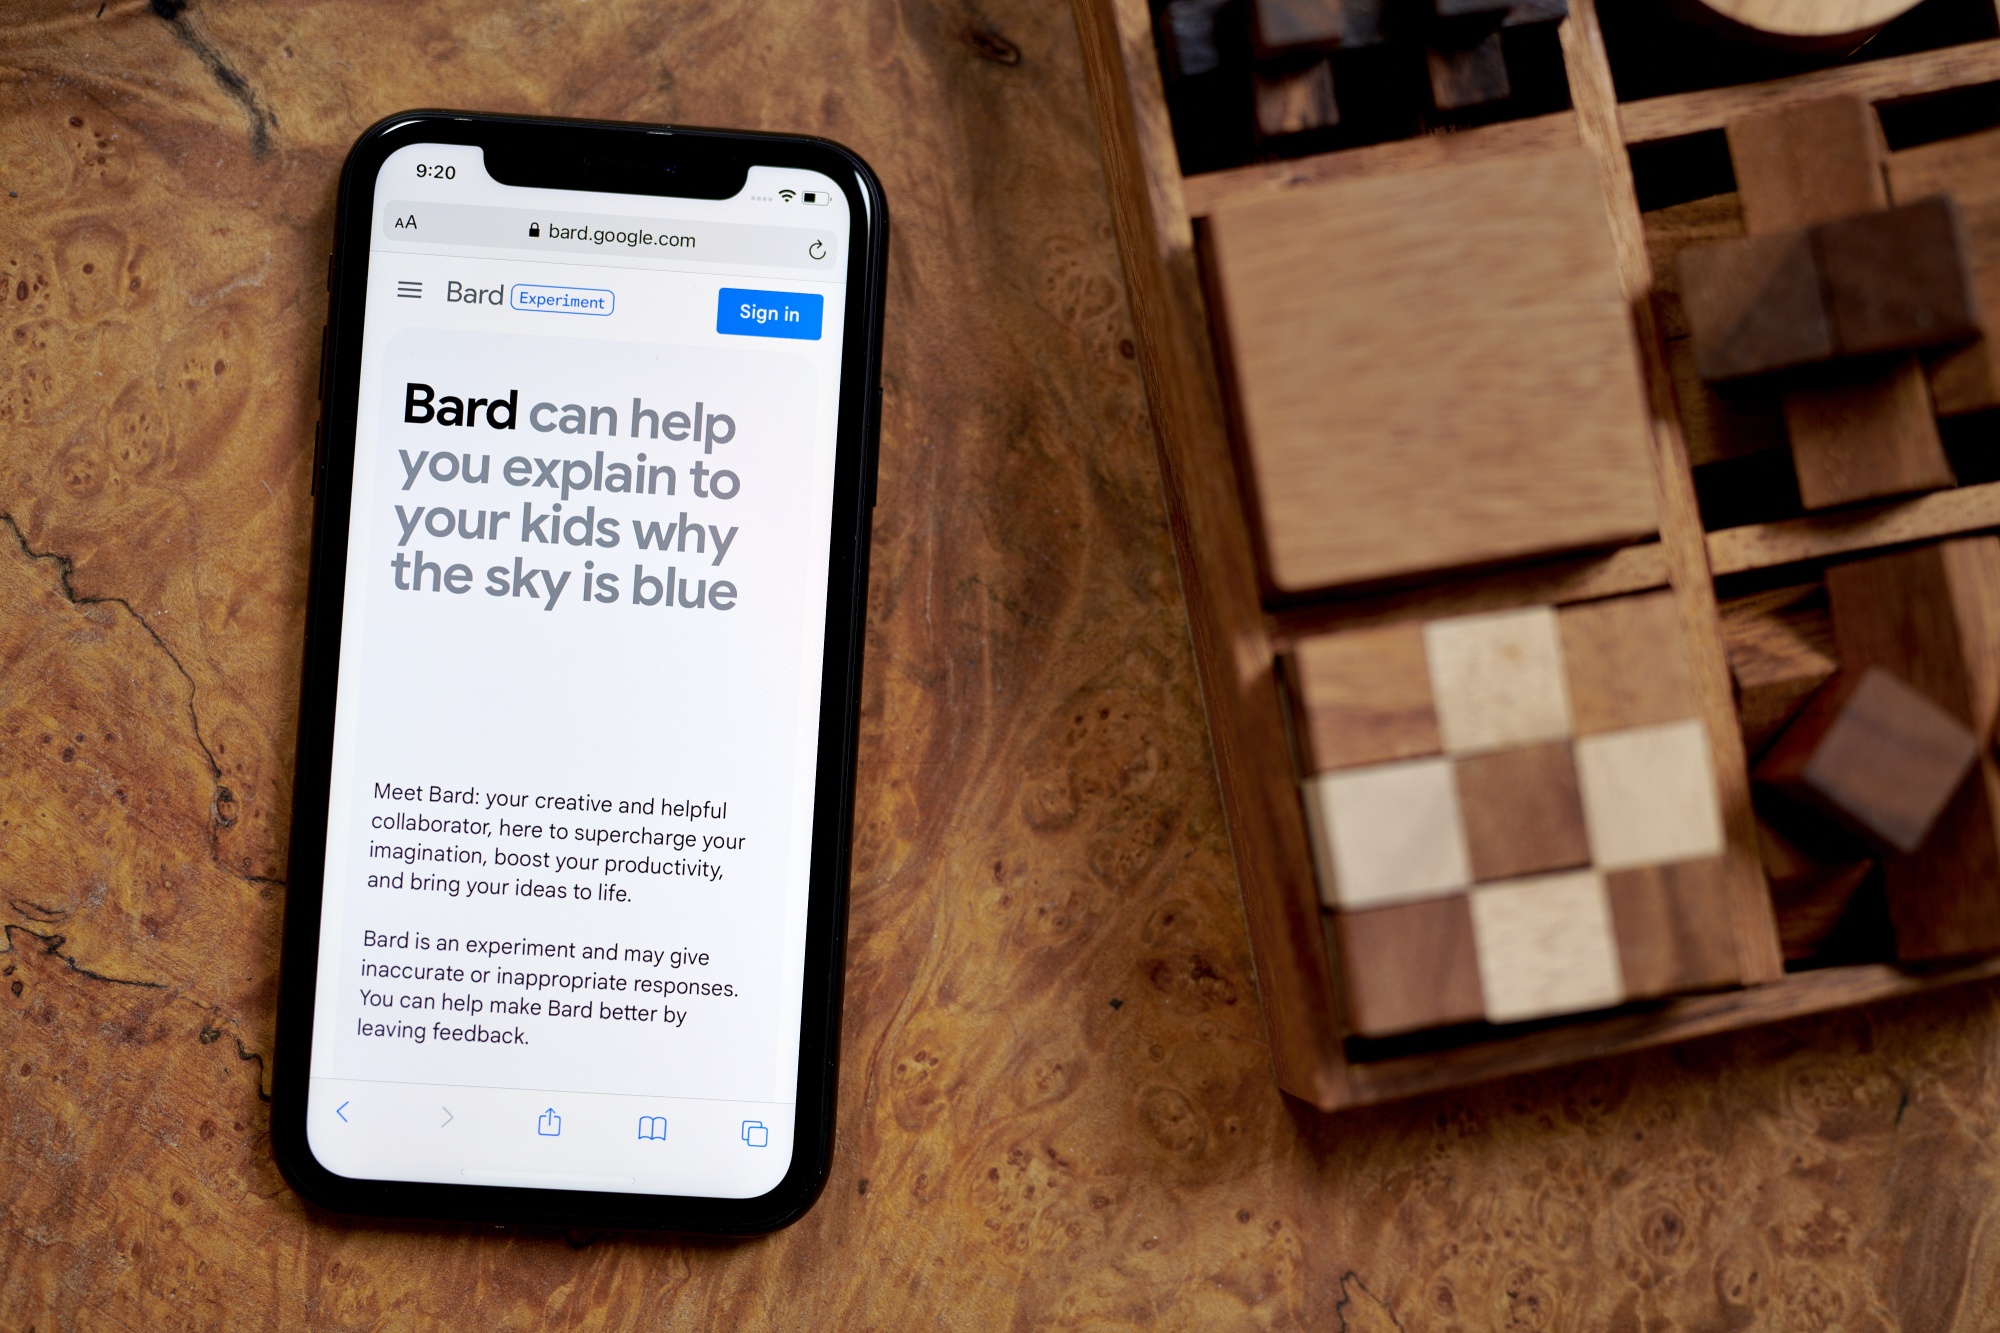 Local Business Sells Out of Wood Using Messenger Bots Case Study